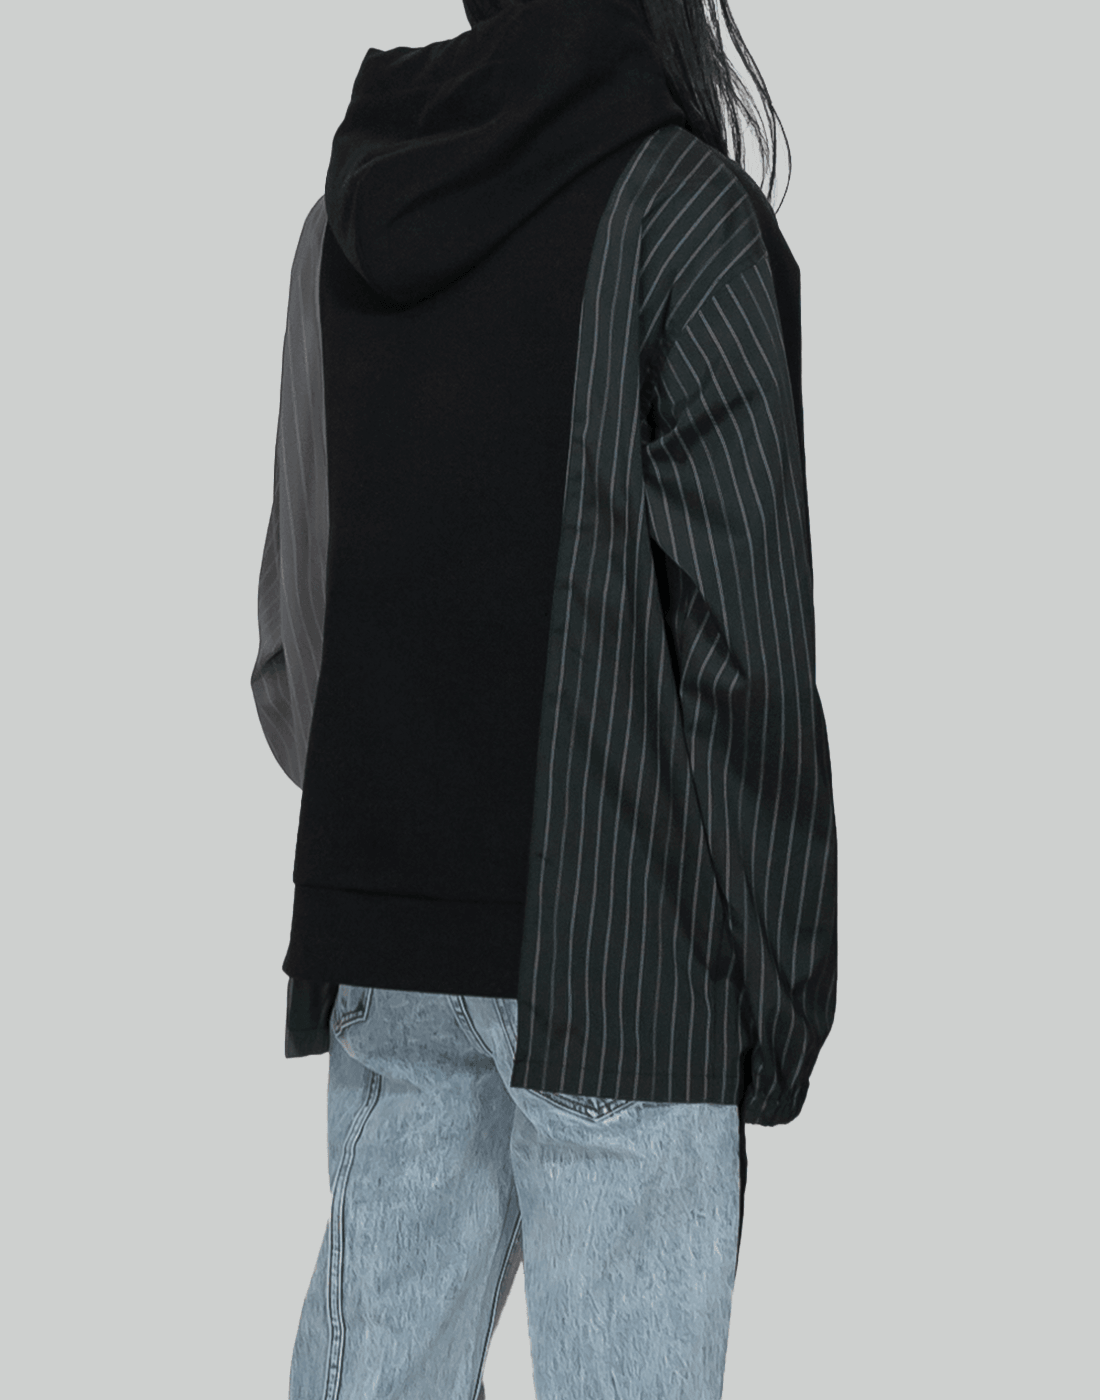 FENG CHEN WANG PANELLED ZIP-UP HOODIE - 082plus